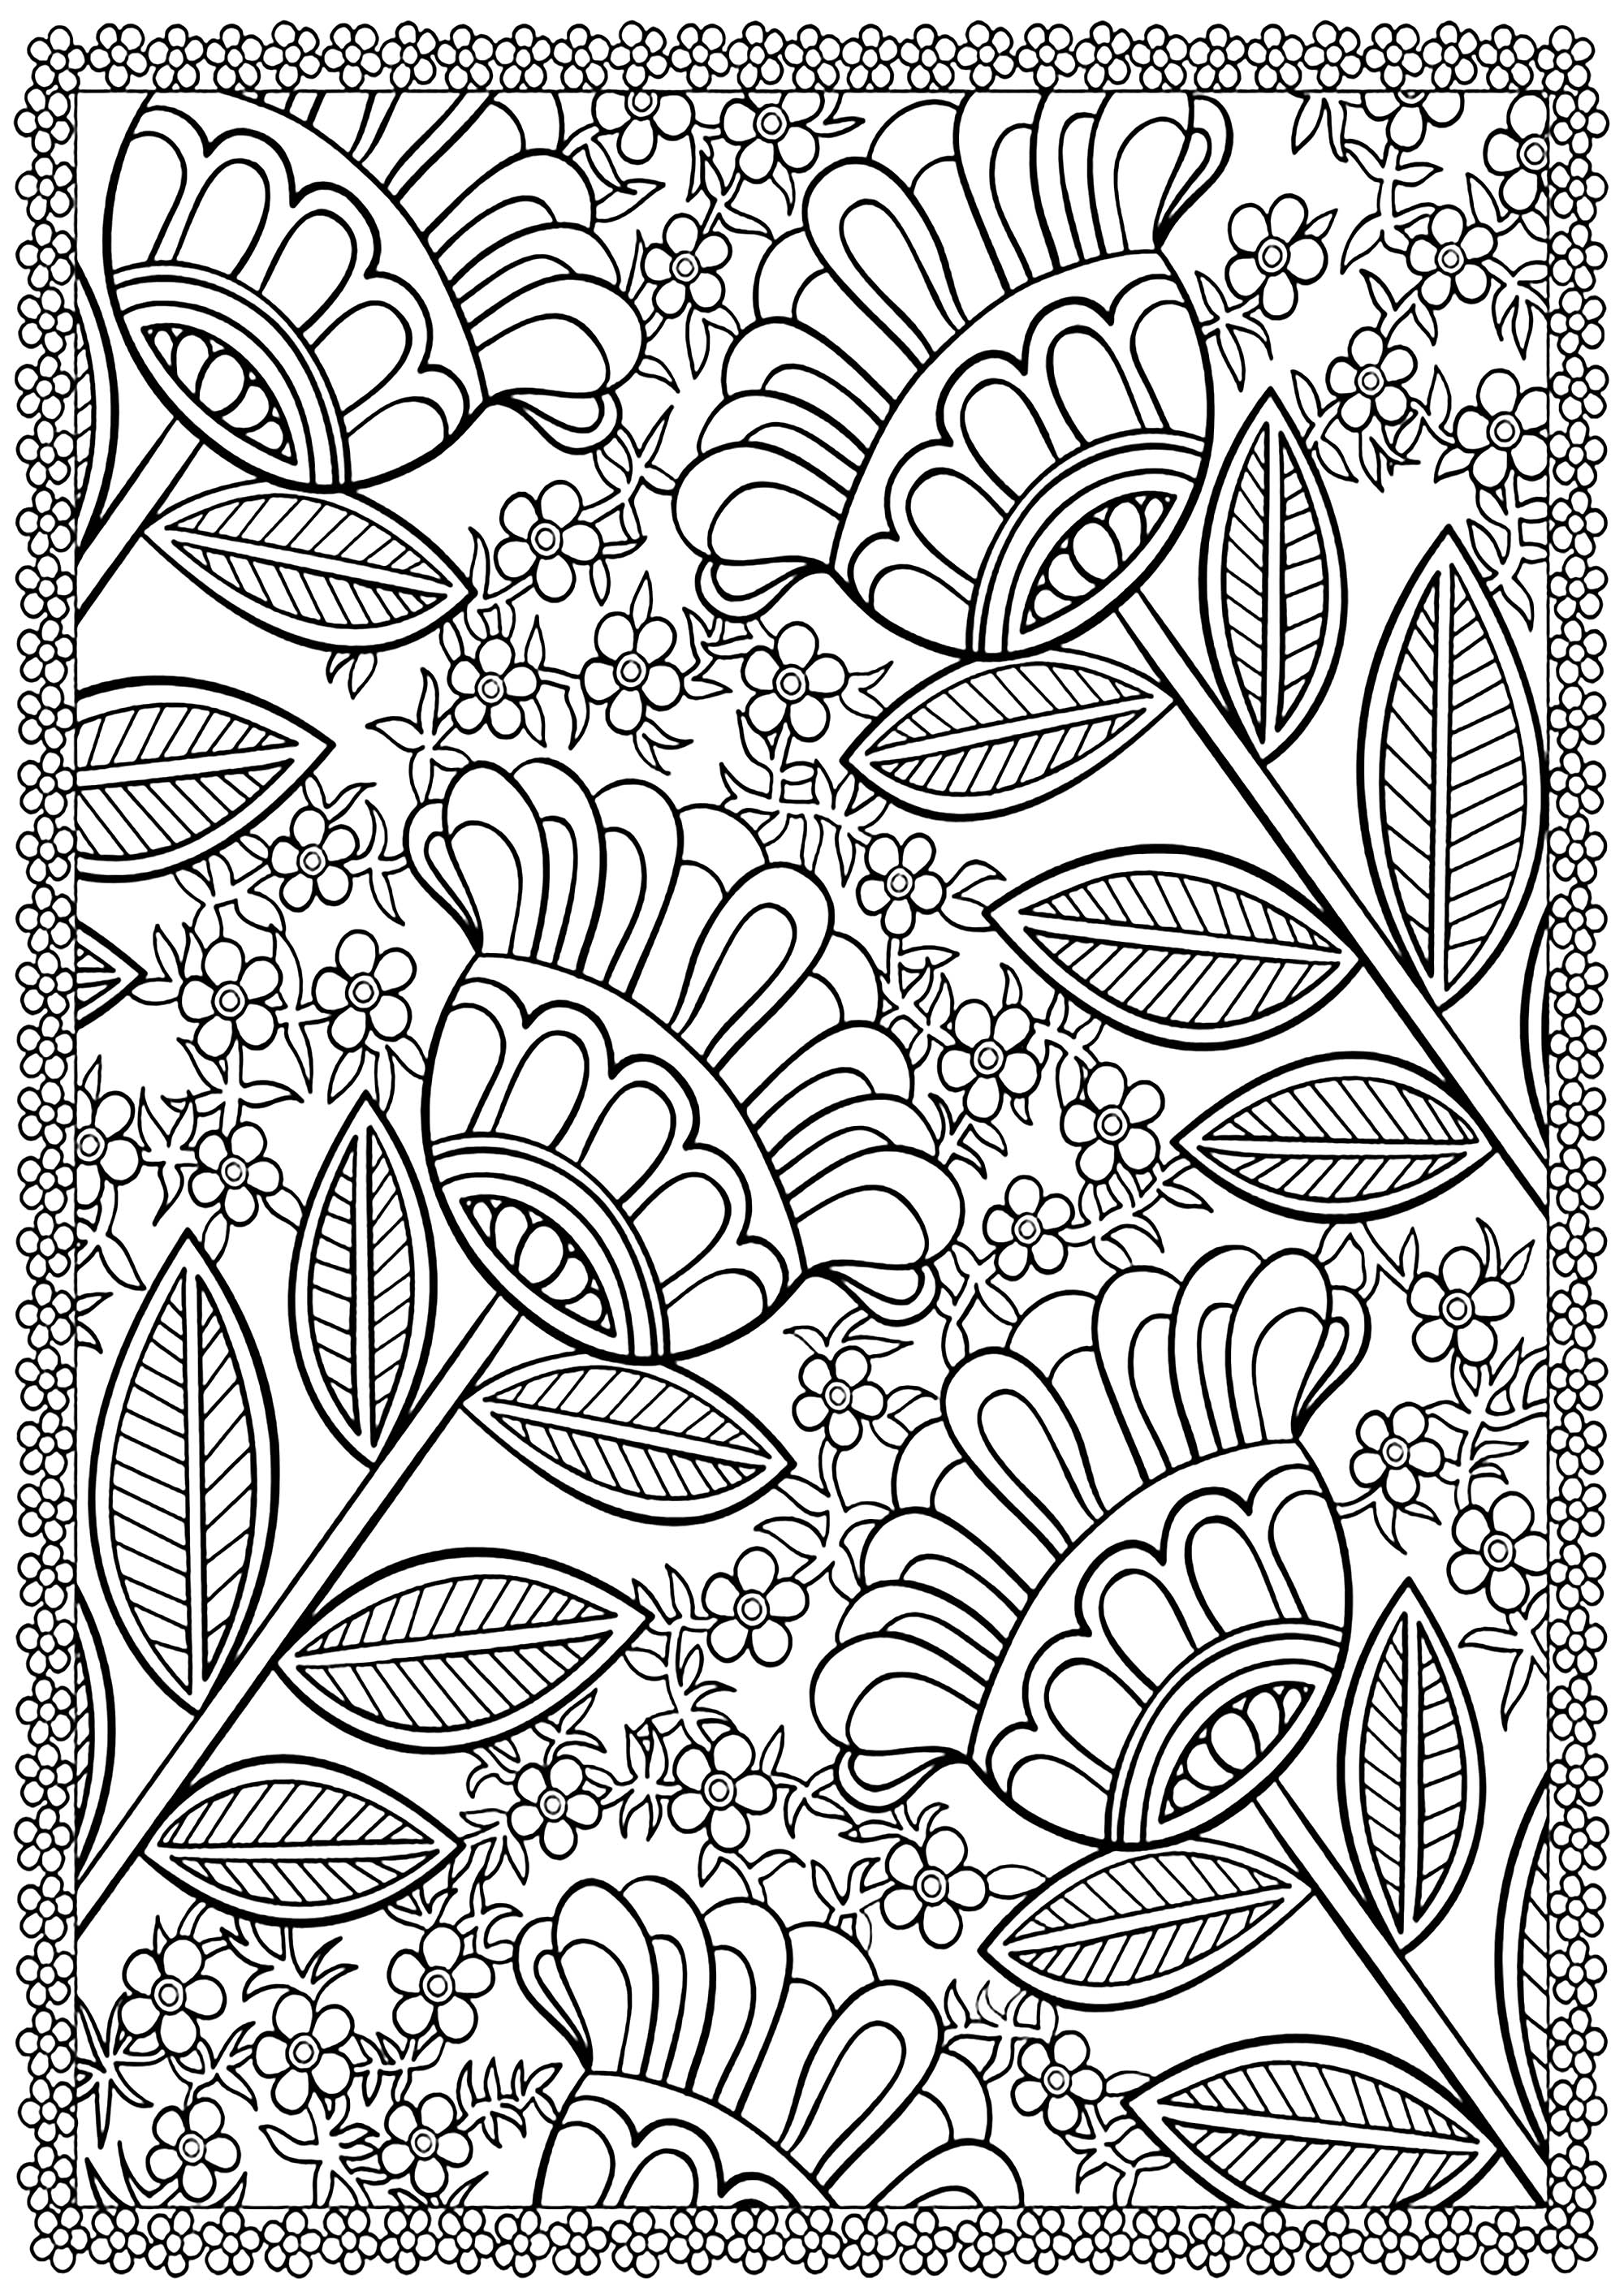 Four big flowers - Flowers Adult Coloring Pages